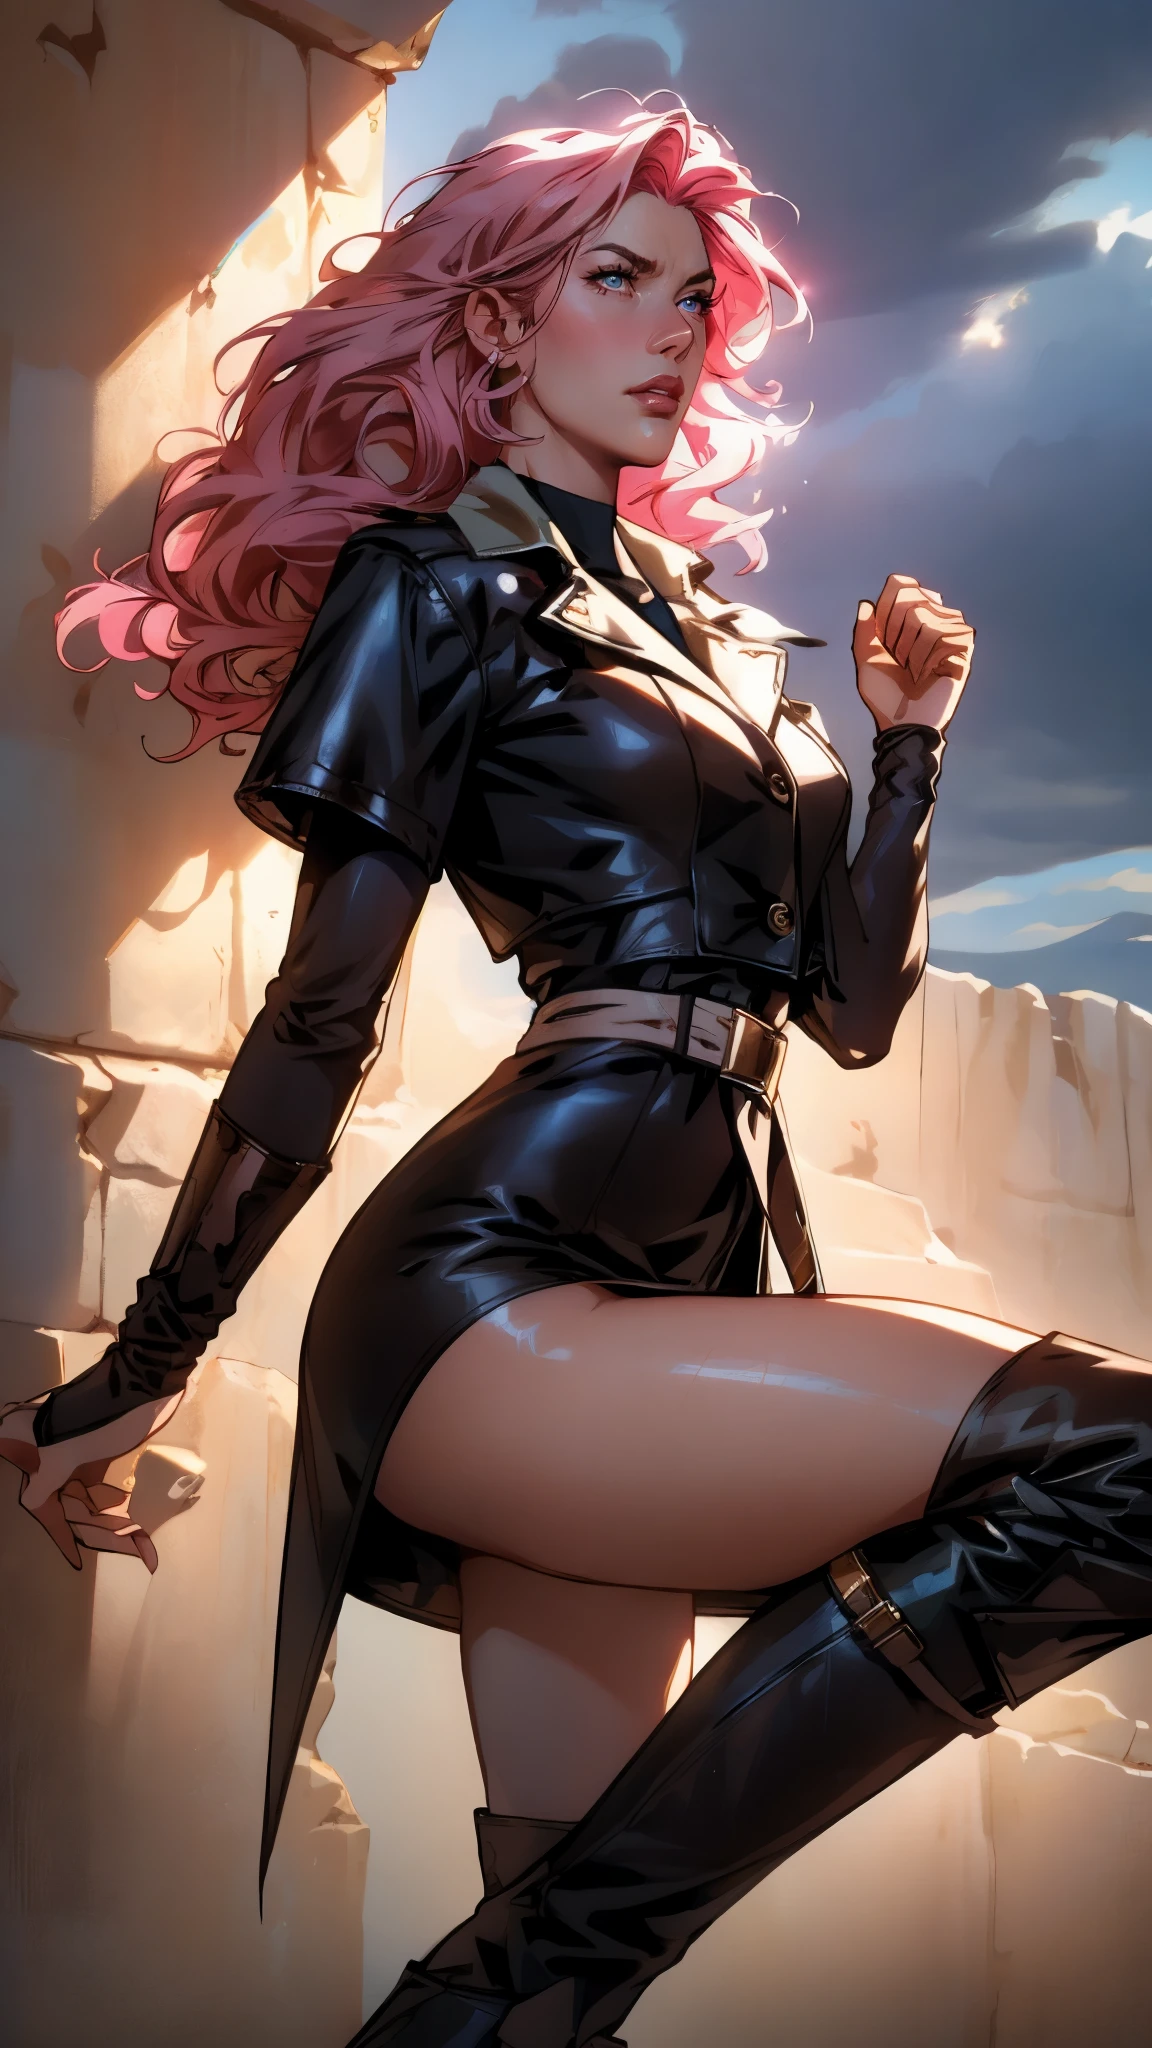 (A beautiful young girl with long curly pink hair, slender eyebrows, sparkling eyes, a bewildered expression, an oval-shapedl face with pale skin, a knee-length form-fitting leather trench coat with very short sleeves, she adorns both hands with metallic wrist guards in a sci-fi ancient civilization style, her long legs are clad in leather boots as she soars through the misty clouds), this character embodies a finely crafted fantasy-realism style western ranger in anime style, exquisite and mature manga art style, porcelain skin, perfect skin, perfect eyes, (Mary Elizabeth Winstead:1.2), high definition, best quality, highres, ultra-detailed, ultra-fine painting, extremely delicate, professional, anatomically correct, symmetrical face, extremely detailed eyes and face, high quality eyes, creativity, RAW photo, UHD, 32k, Natural light, cinematic lighting, masterpiece-anatomy-perfect, masterpiece:1.5